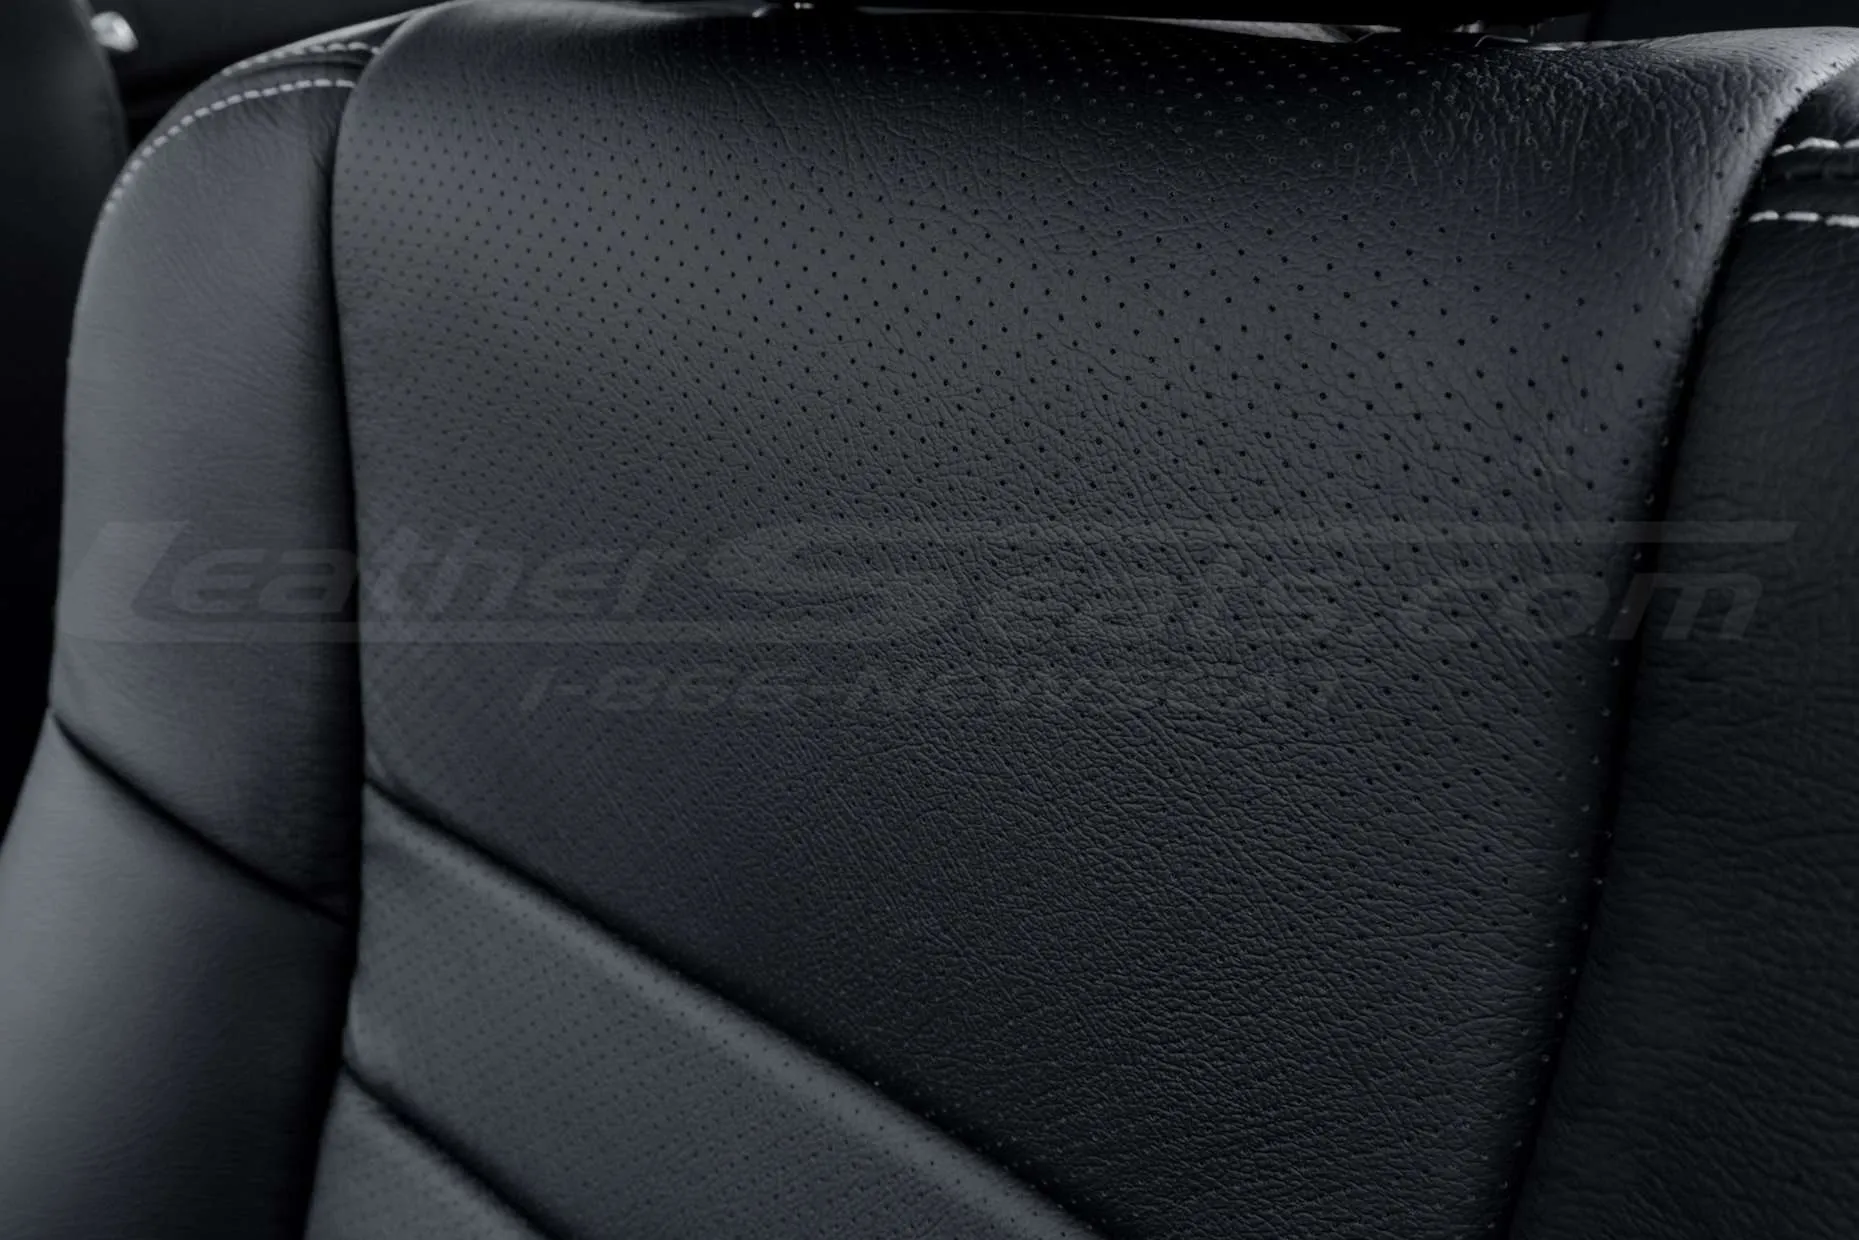 Perforated Body section close-up of installed leather interior